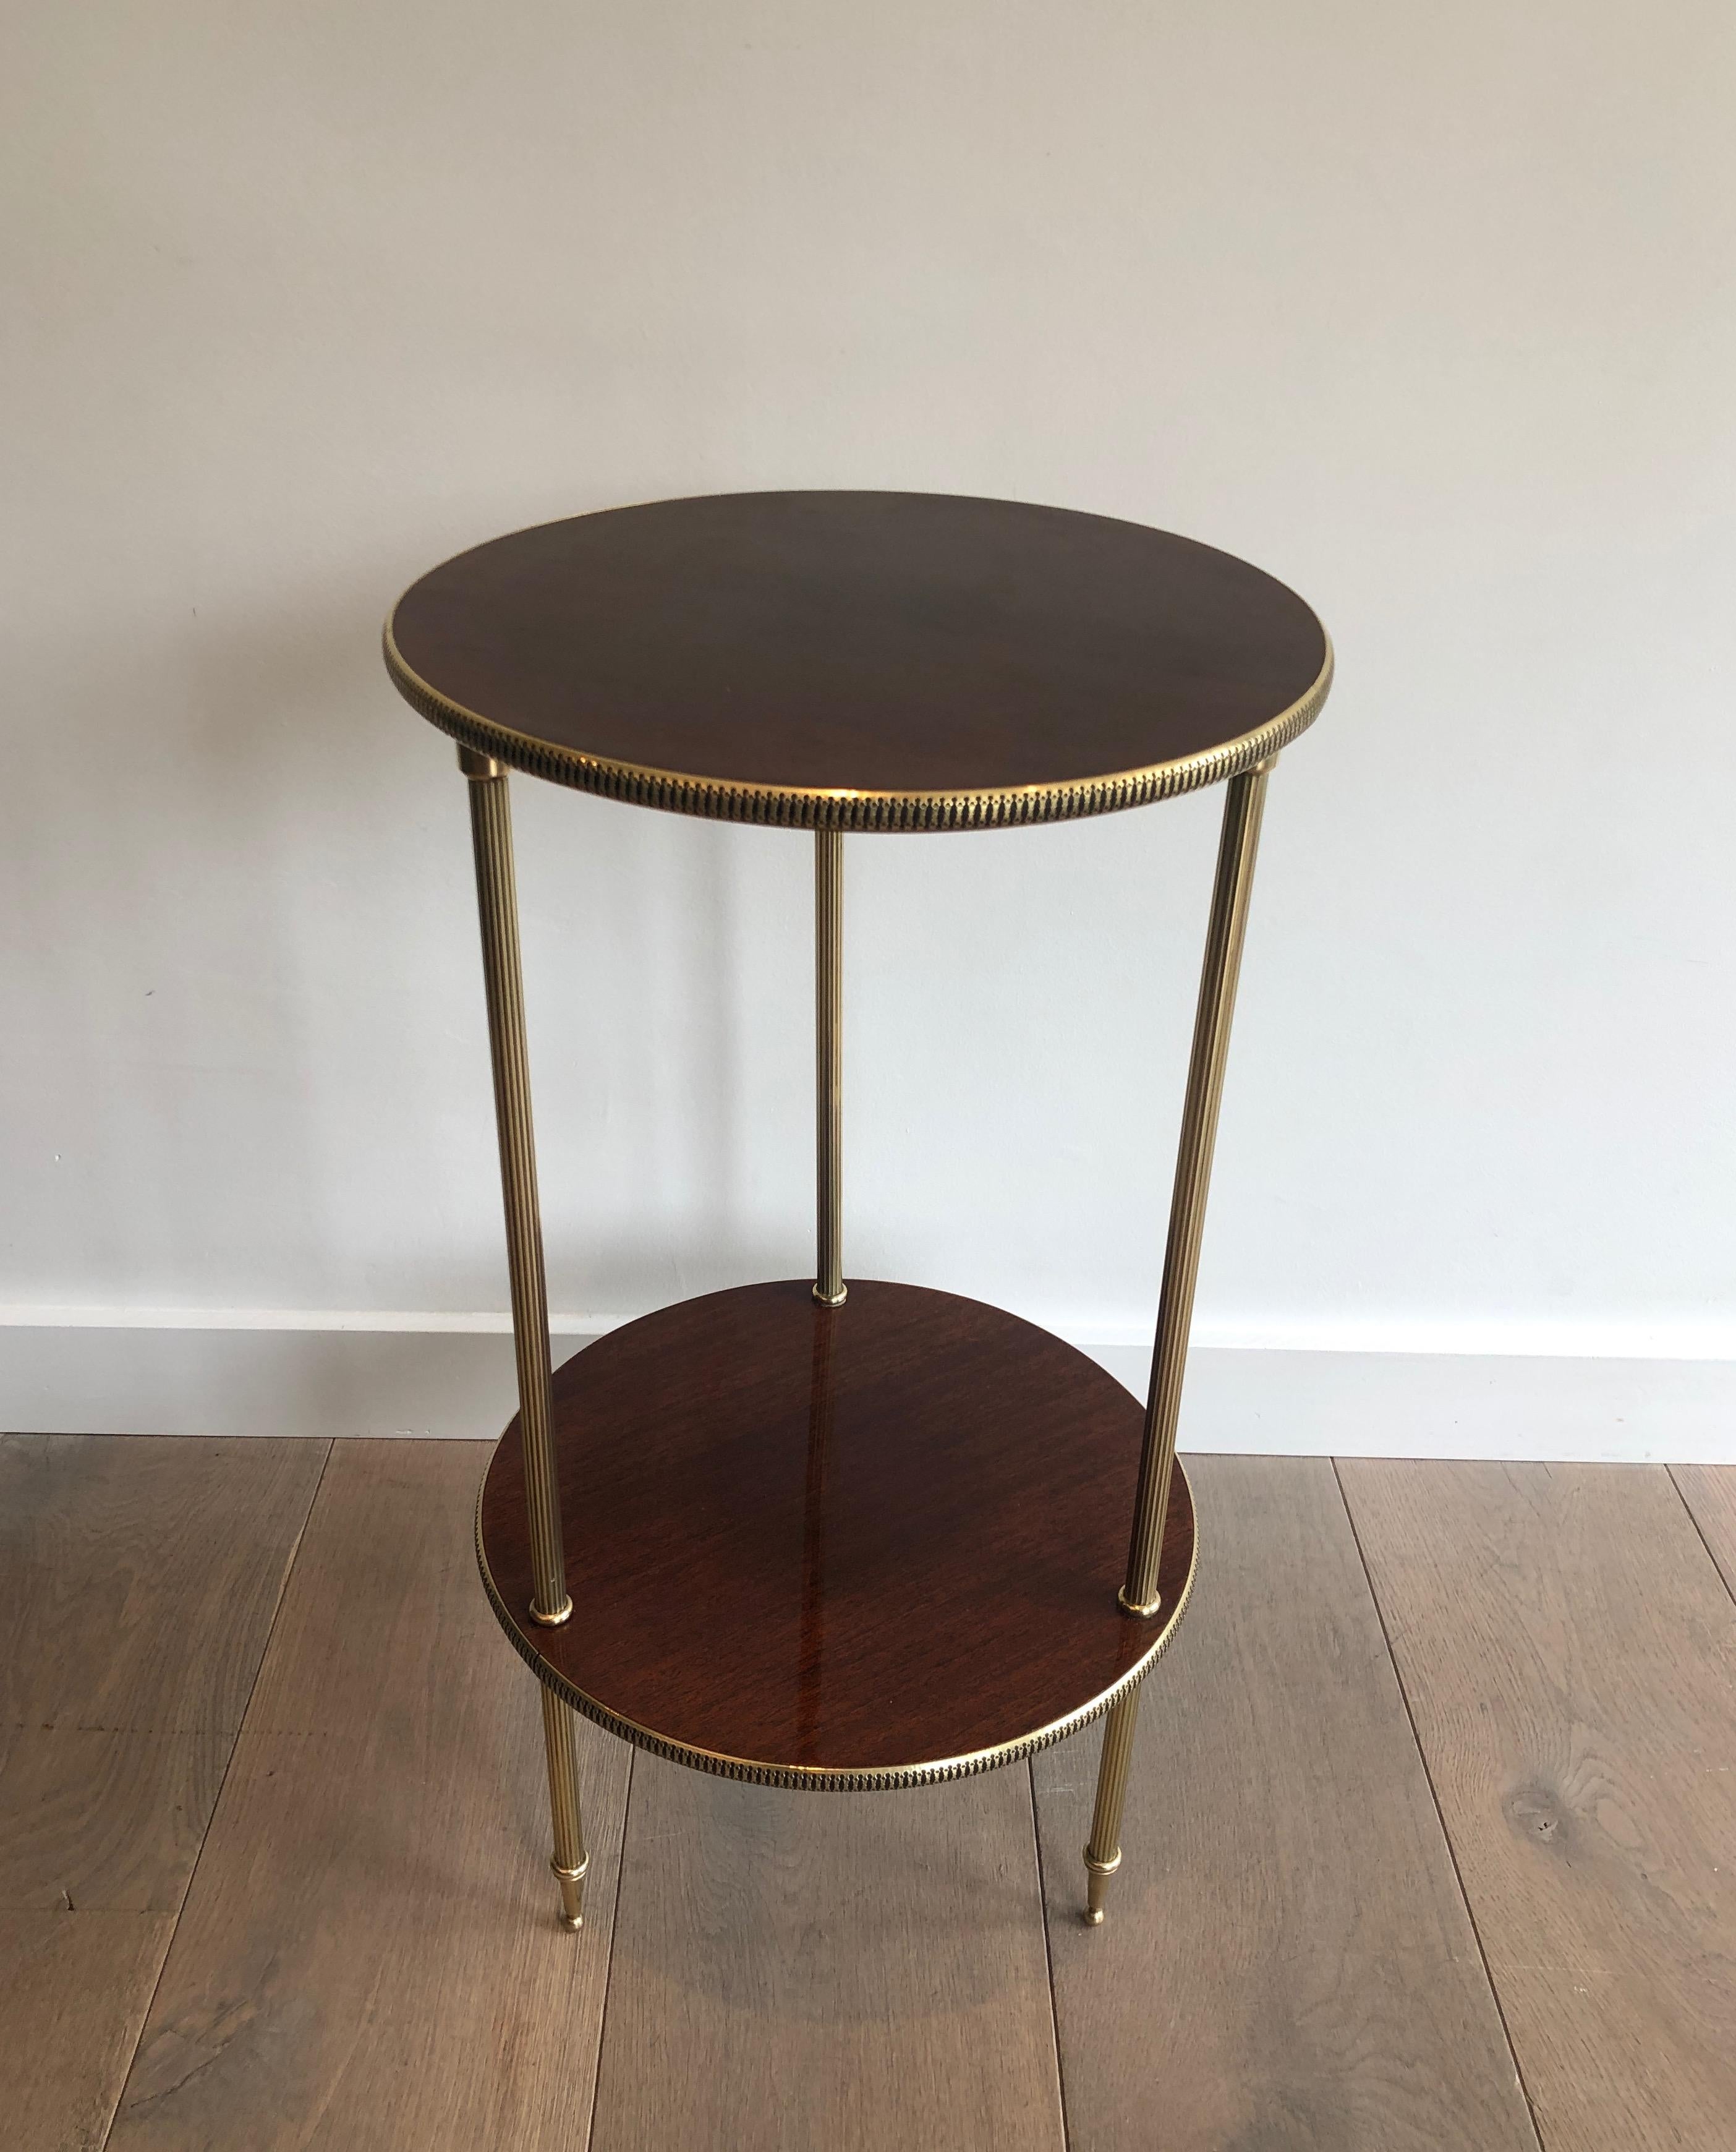 This neoclassical style round side table is made of mahogany trays surrounded by brass decorations and supported by brass feet. It can be used as a Martini table. This is a nice French work, circa 1950.